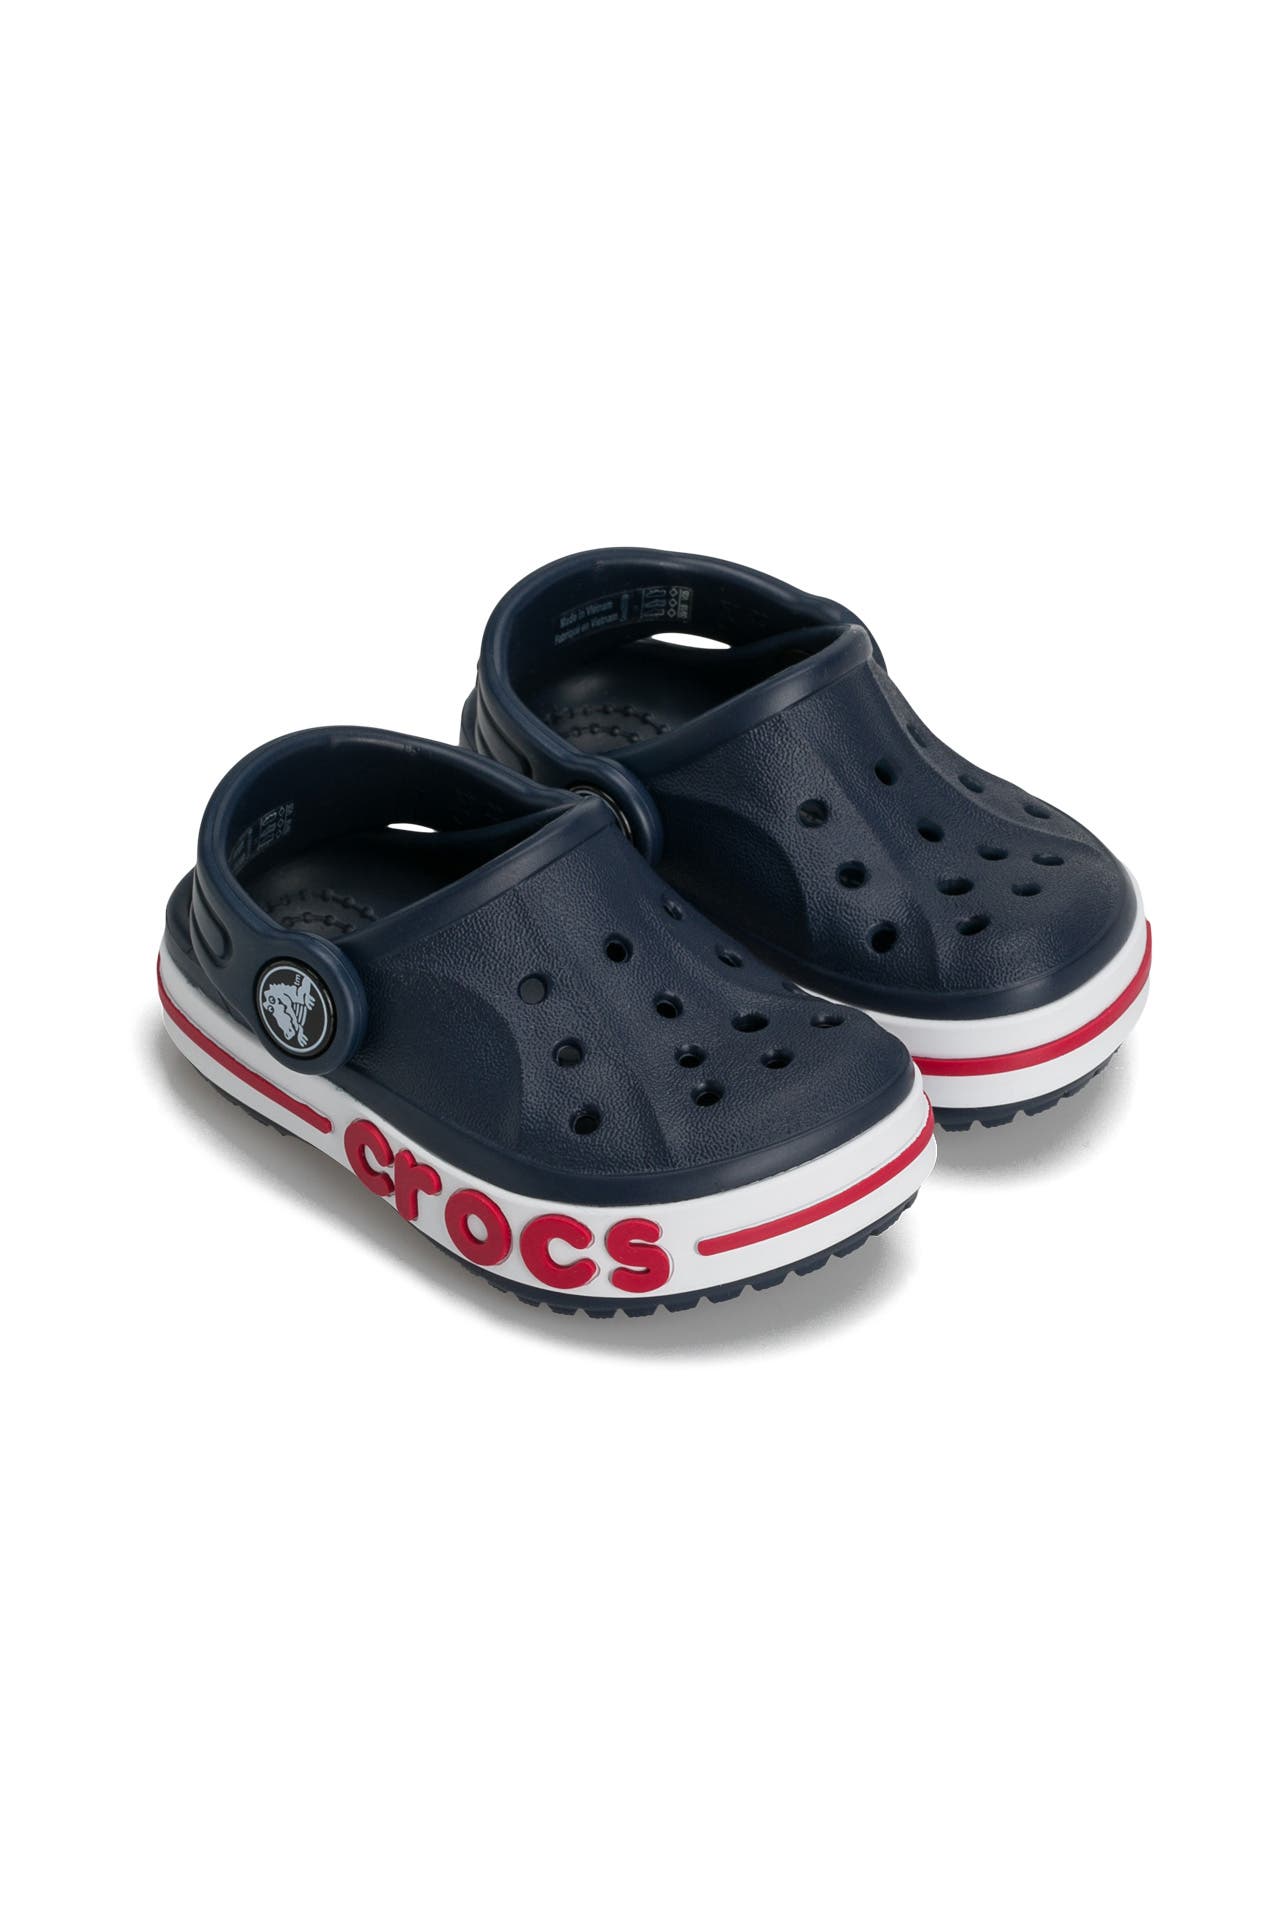 Wees tevreden klauw Wieg Crocs OUTLET in Germany • Sale up to 70%* off | Outletcity Metzingen